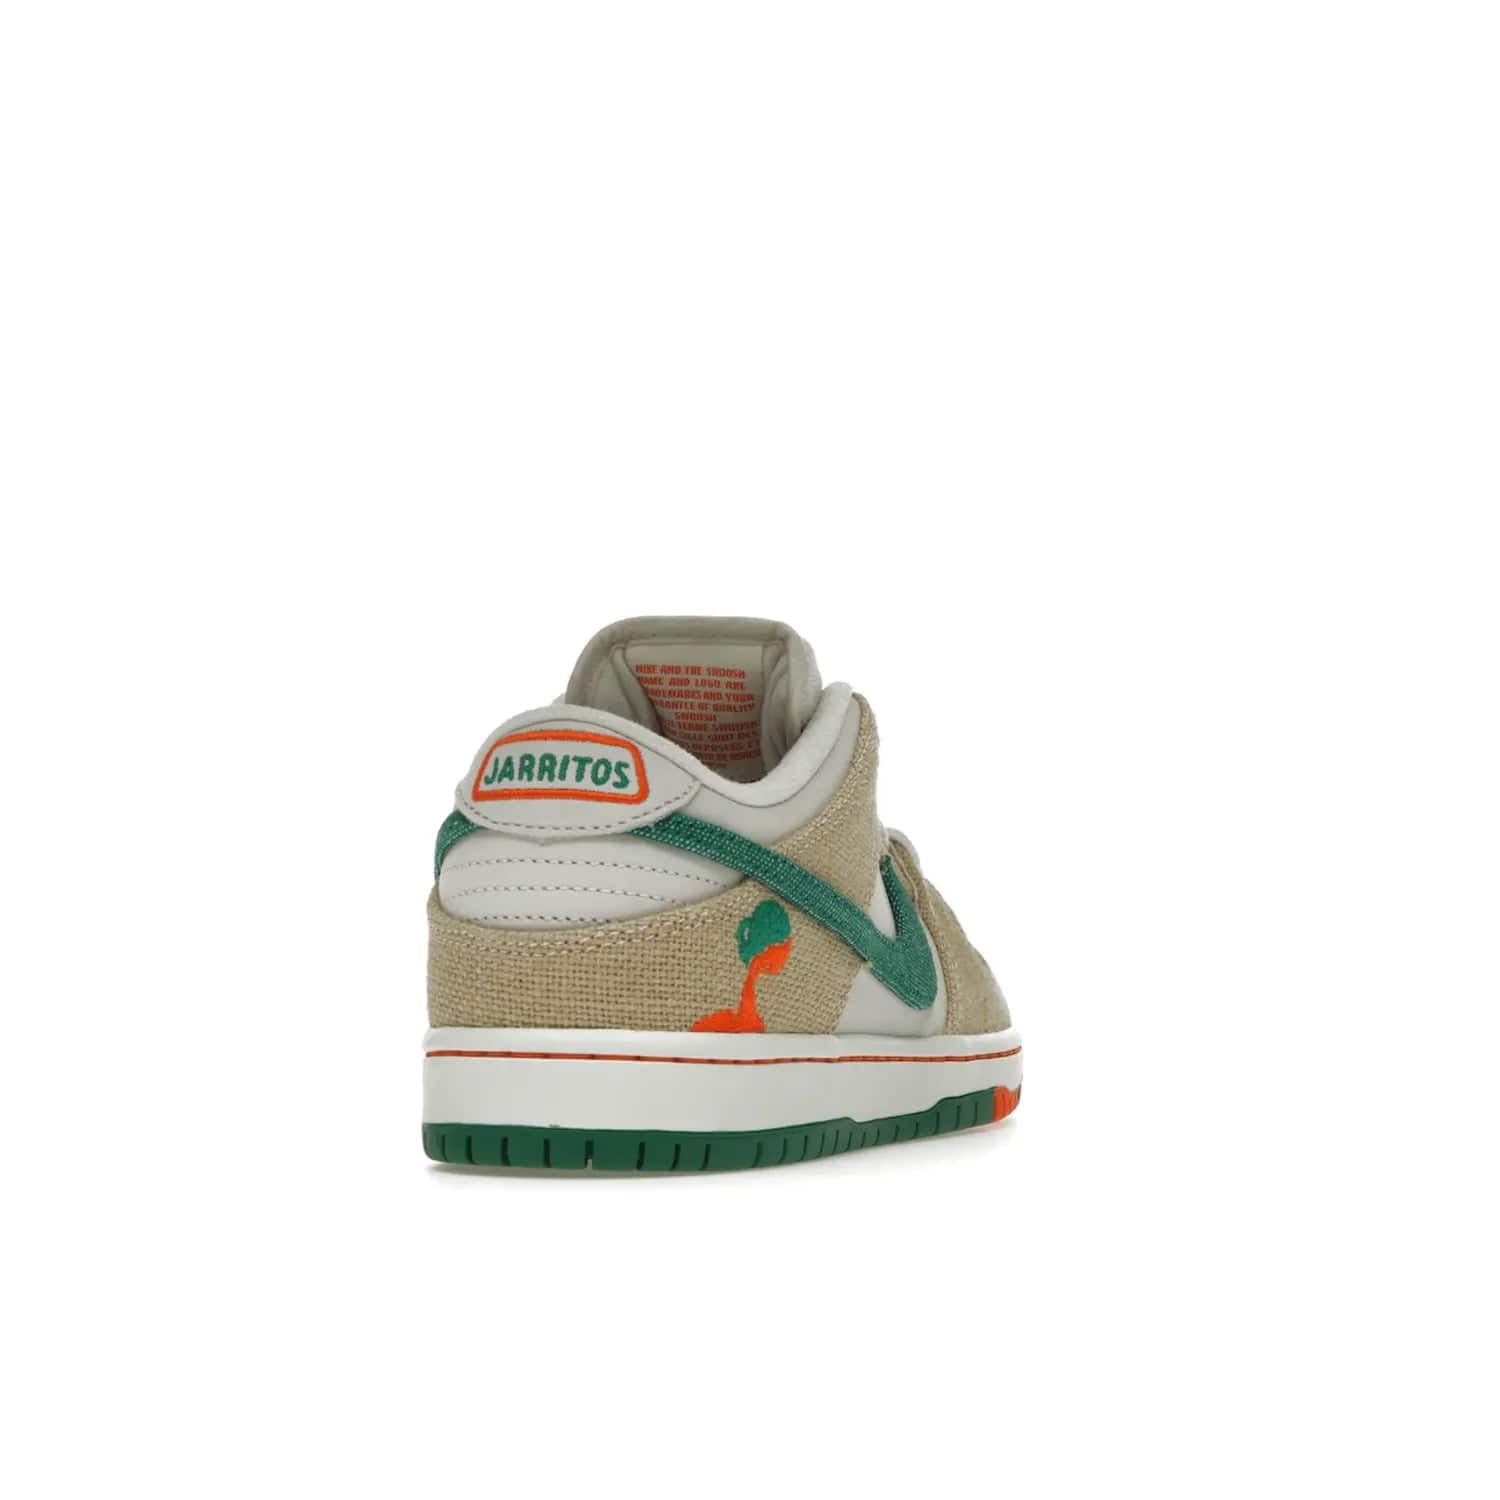 Nike SB Dunk Low Jarritos - Image 30 - Only at www.BallersClubKickz.com - Shop limited edition Nike SB Dunk Low Jarritos! Crafted with white leather and tear-away canvas materials with green accents. Includes orange, green, and white laces to customize your look. Available now.